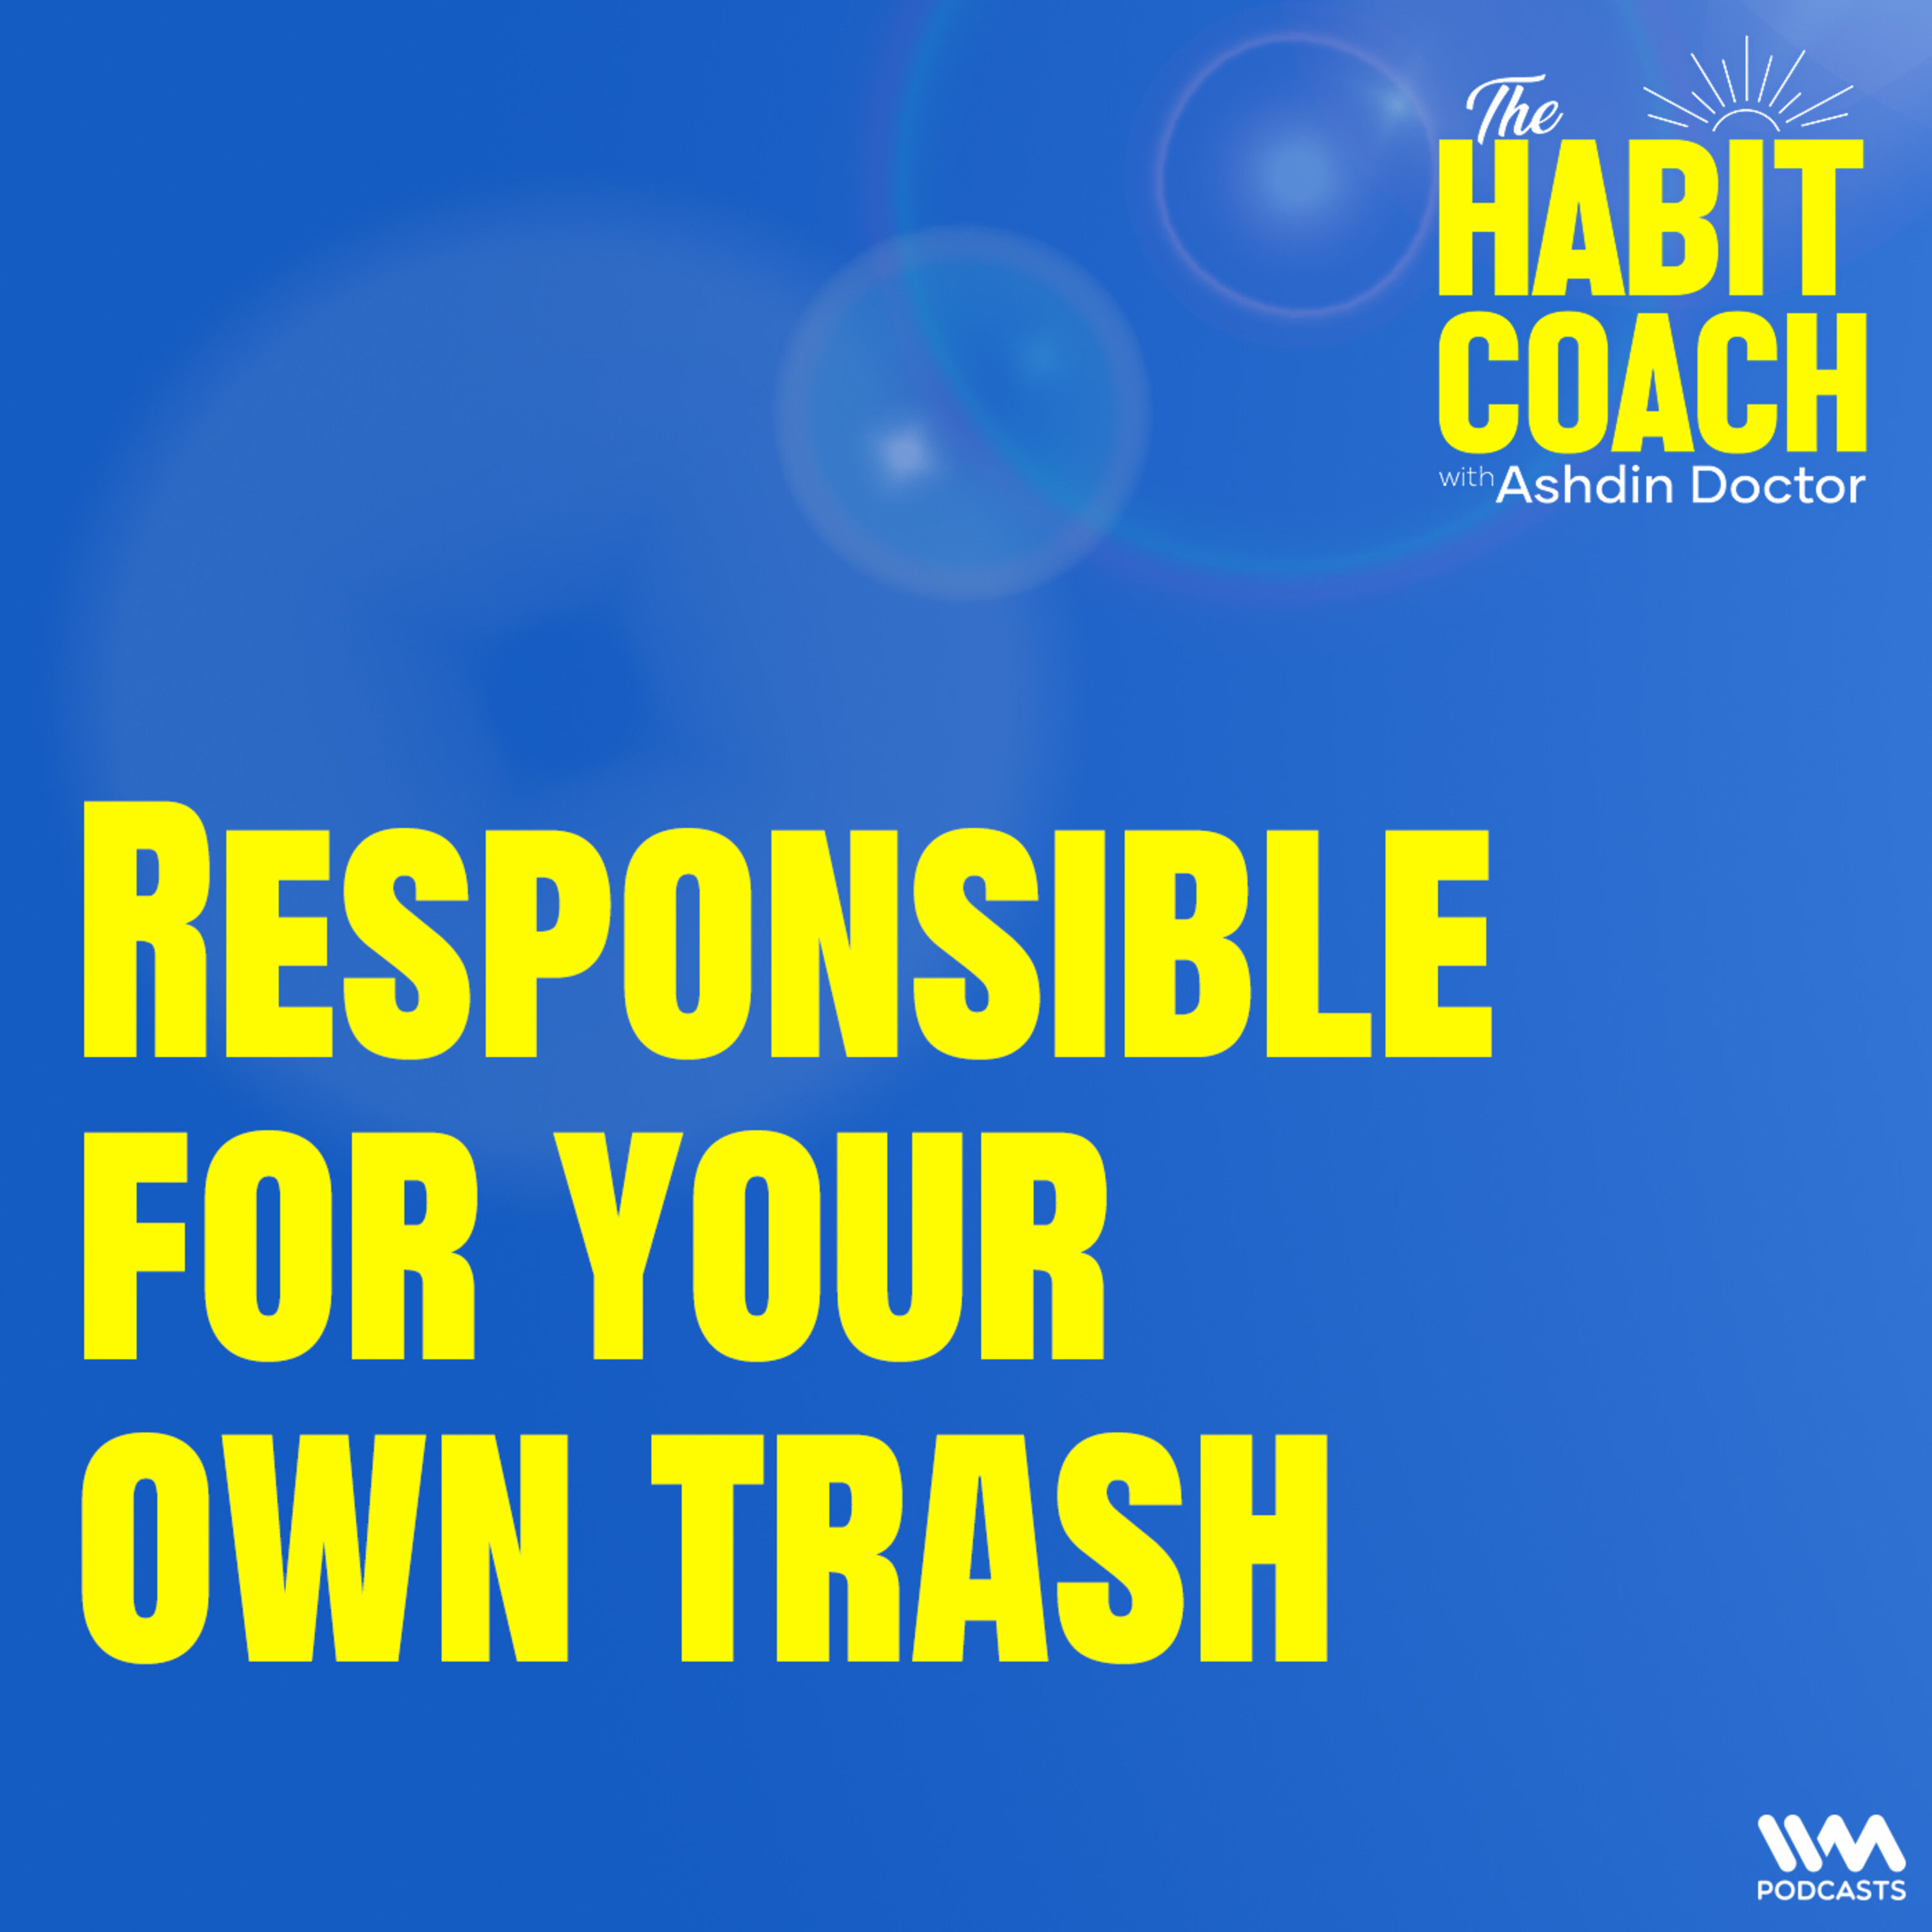 Responsible for your own trash